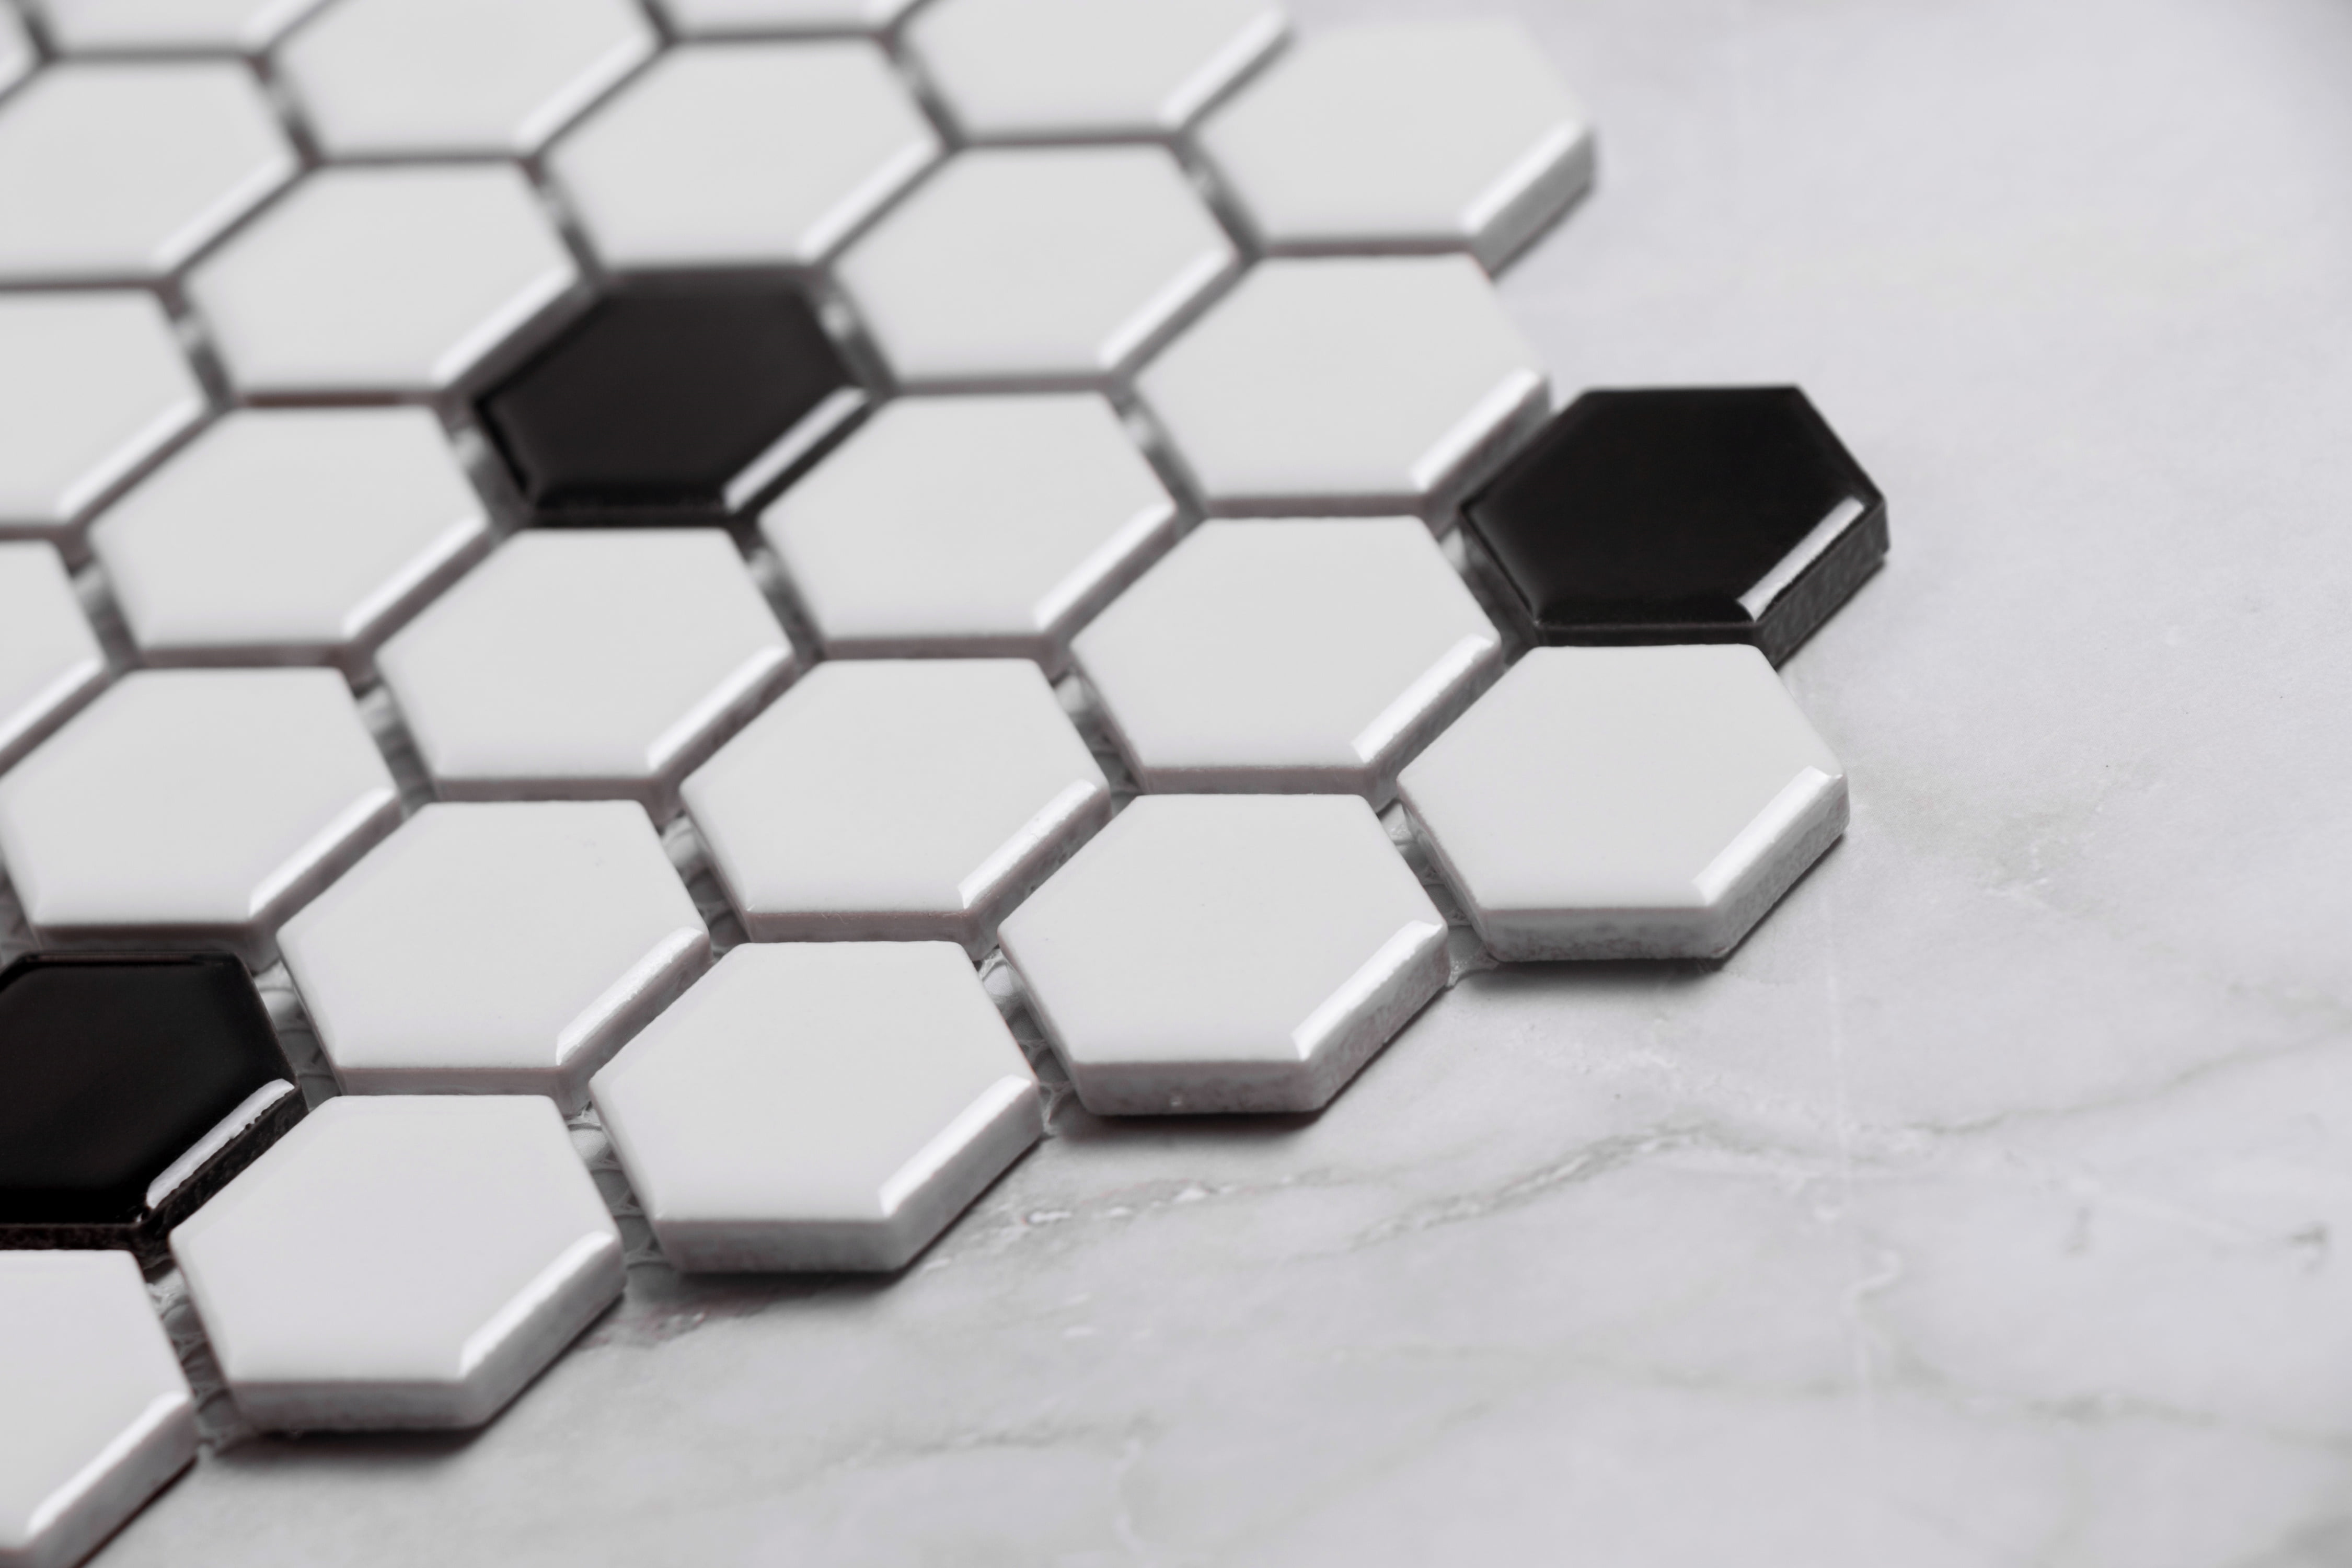 Hexagon Mosaic Floor Wall Tile, Small Black And White Octagon Tile